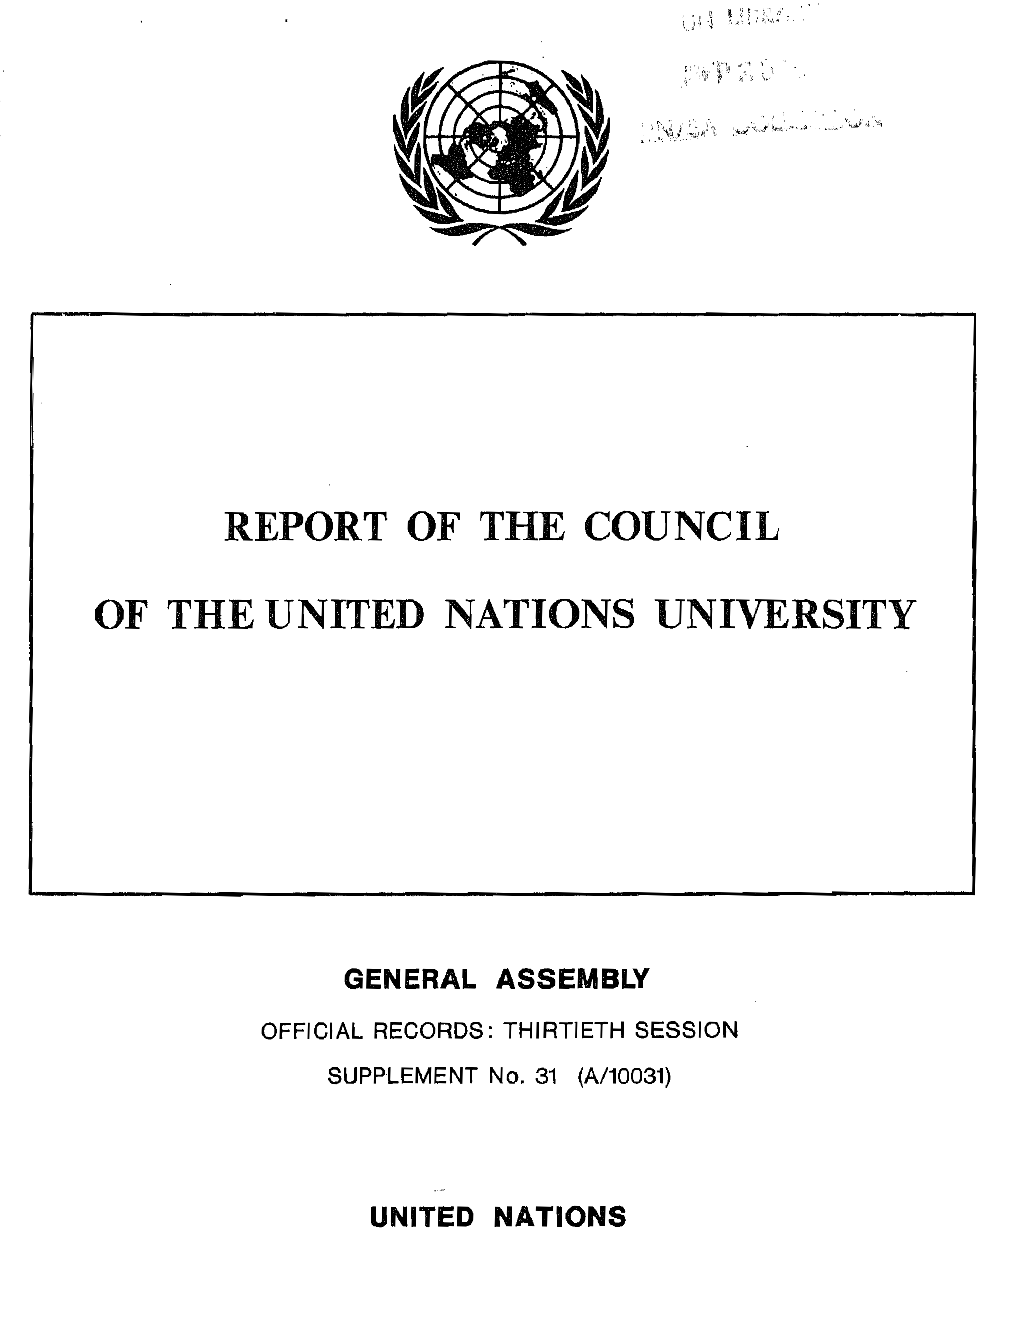 Report of the Council of the United Nations Uni7ersity on the Work of the University